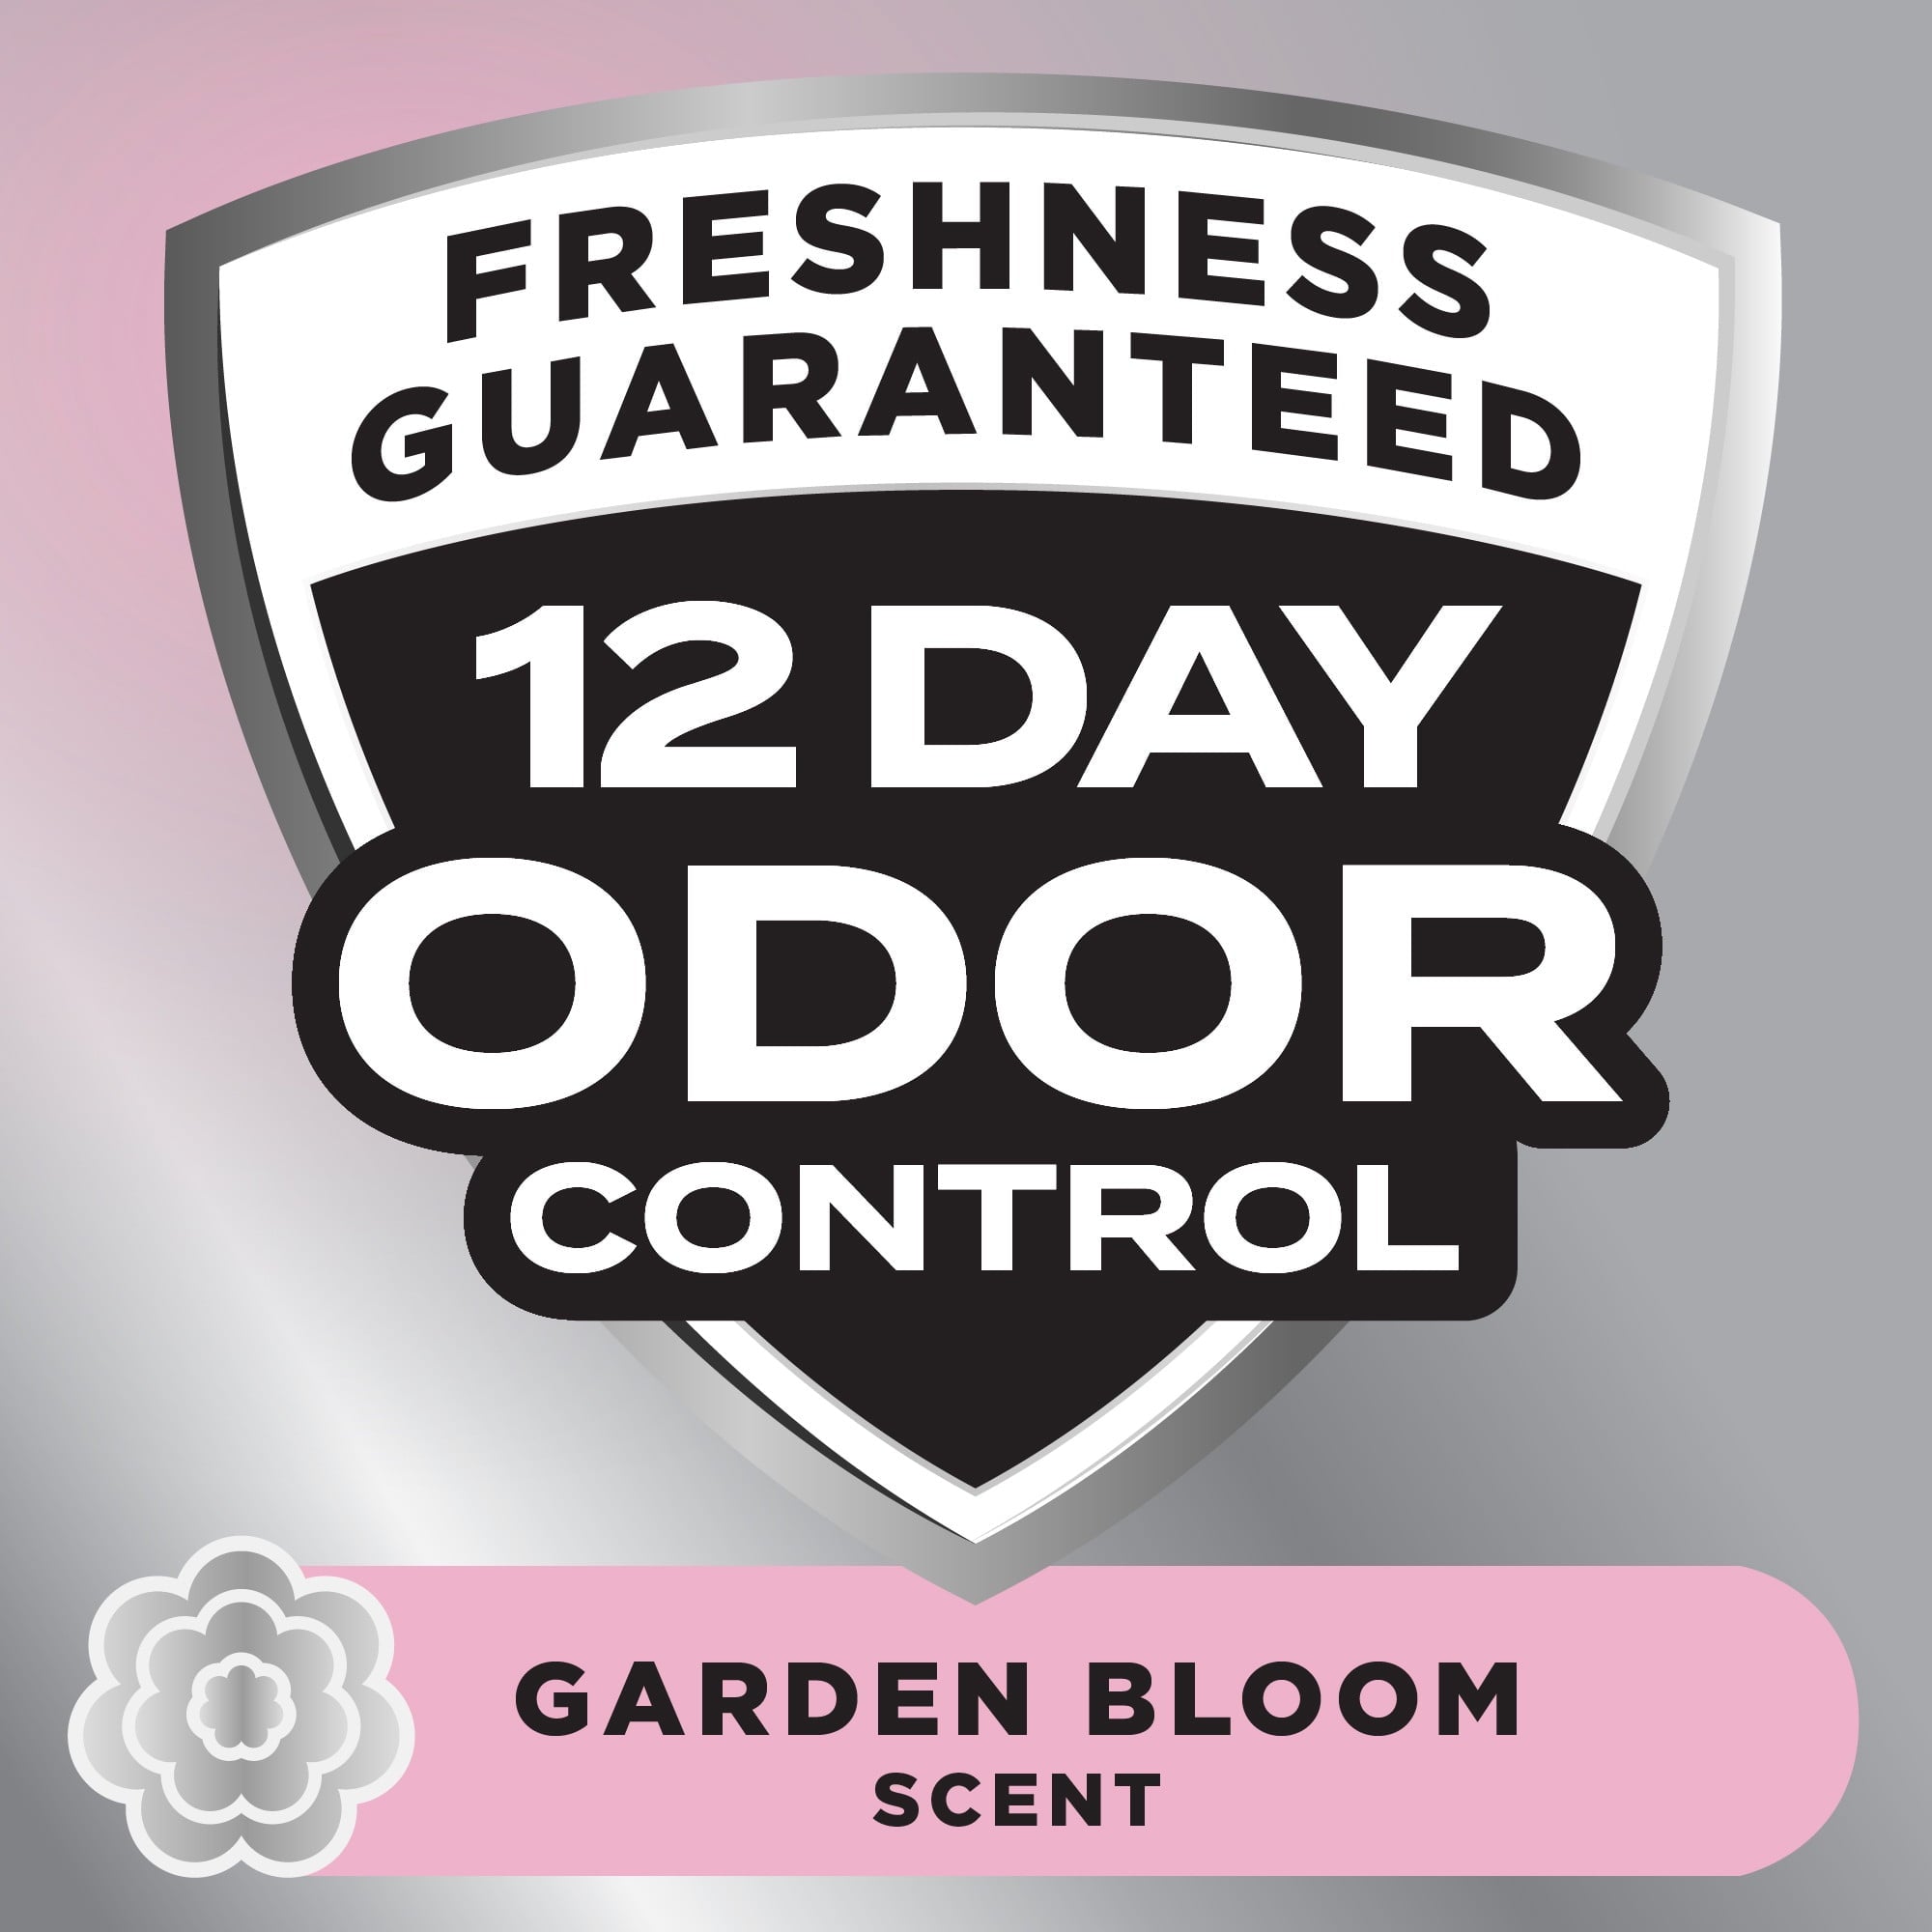 Wholesale prices with free shipping all over United States Arm & Hammer Hardball Lightweight Easy No-Mess Scooping Garden Bloom Scent Multi-Cat Clumping Litter, 7lb - Steven Deals